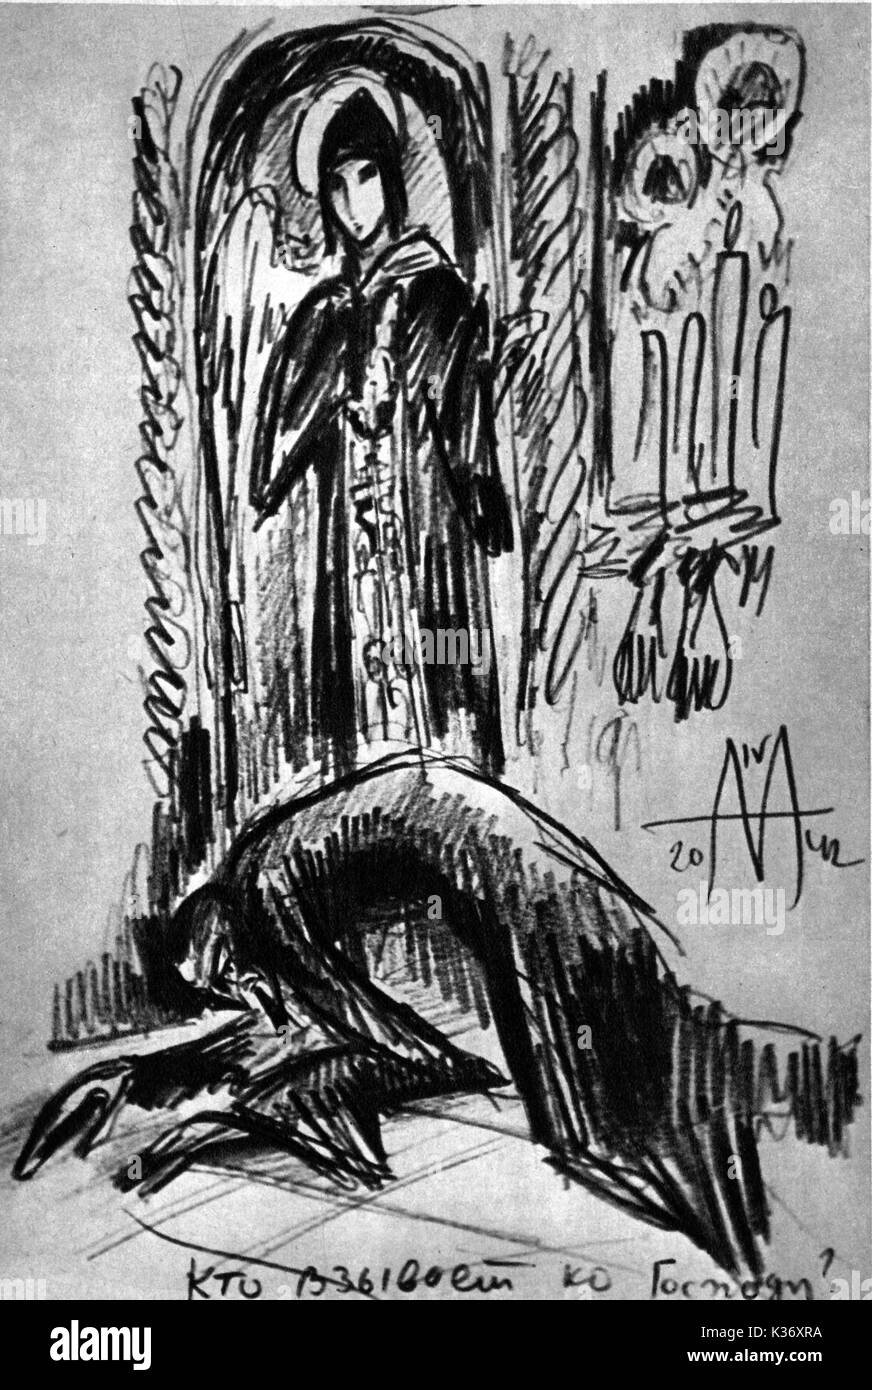 SERGEI EISENSTEIN'S SKETCH OF THE TRAR'S PENANCE IN IVAN THE TERRIBLE FROM THE RONALD GRANT ARCHIVE PLEASE CREDIT COPYRIGHT EISENSTEIN ESTATE Stock Photo